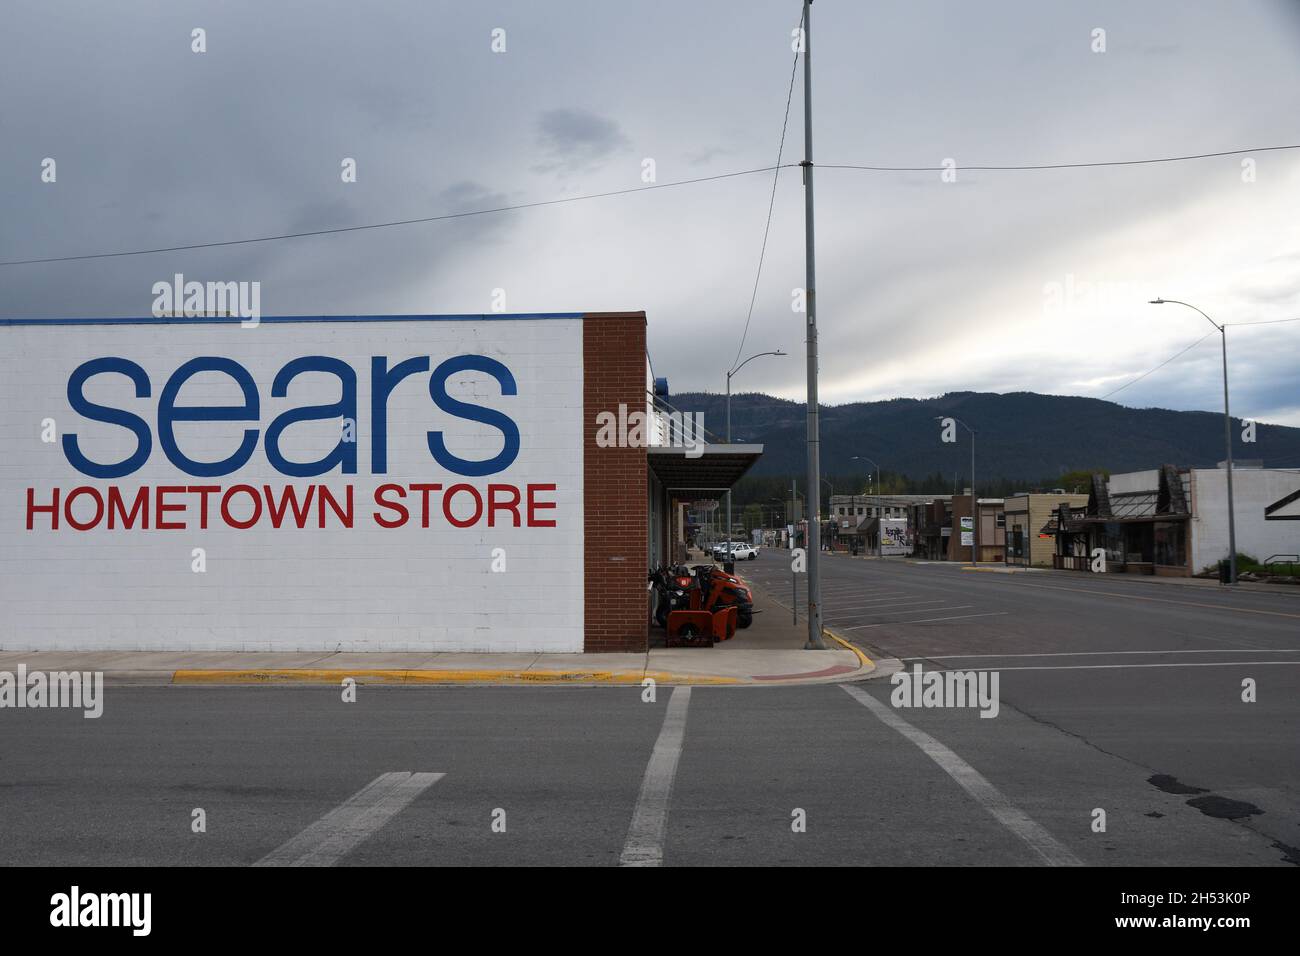 Sears Hometown Store in Libby, Montana. Stock Photo